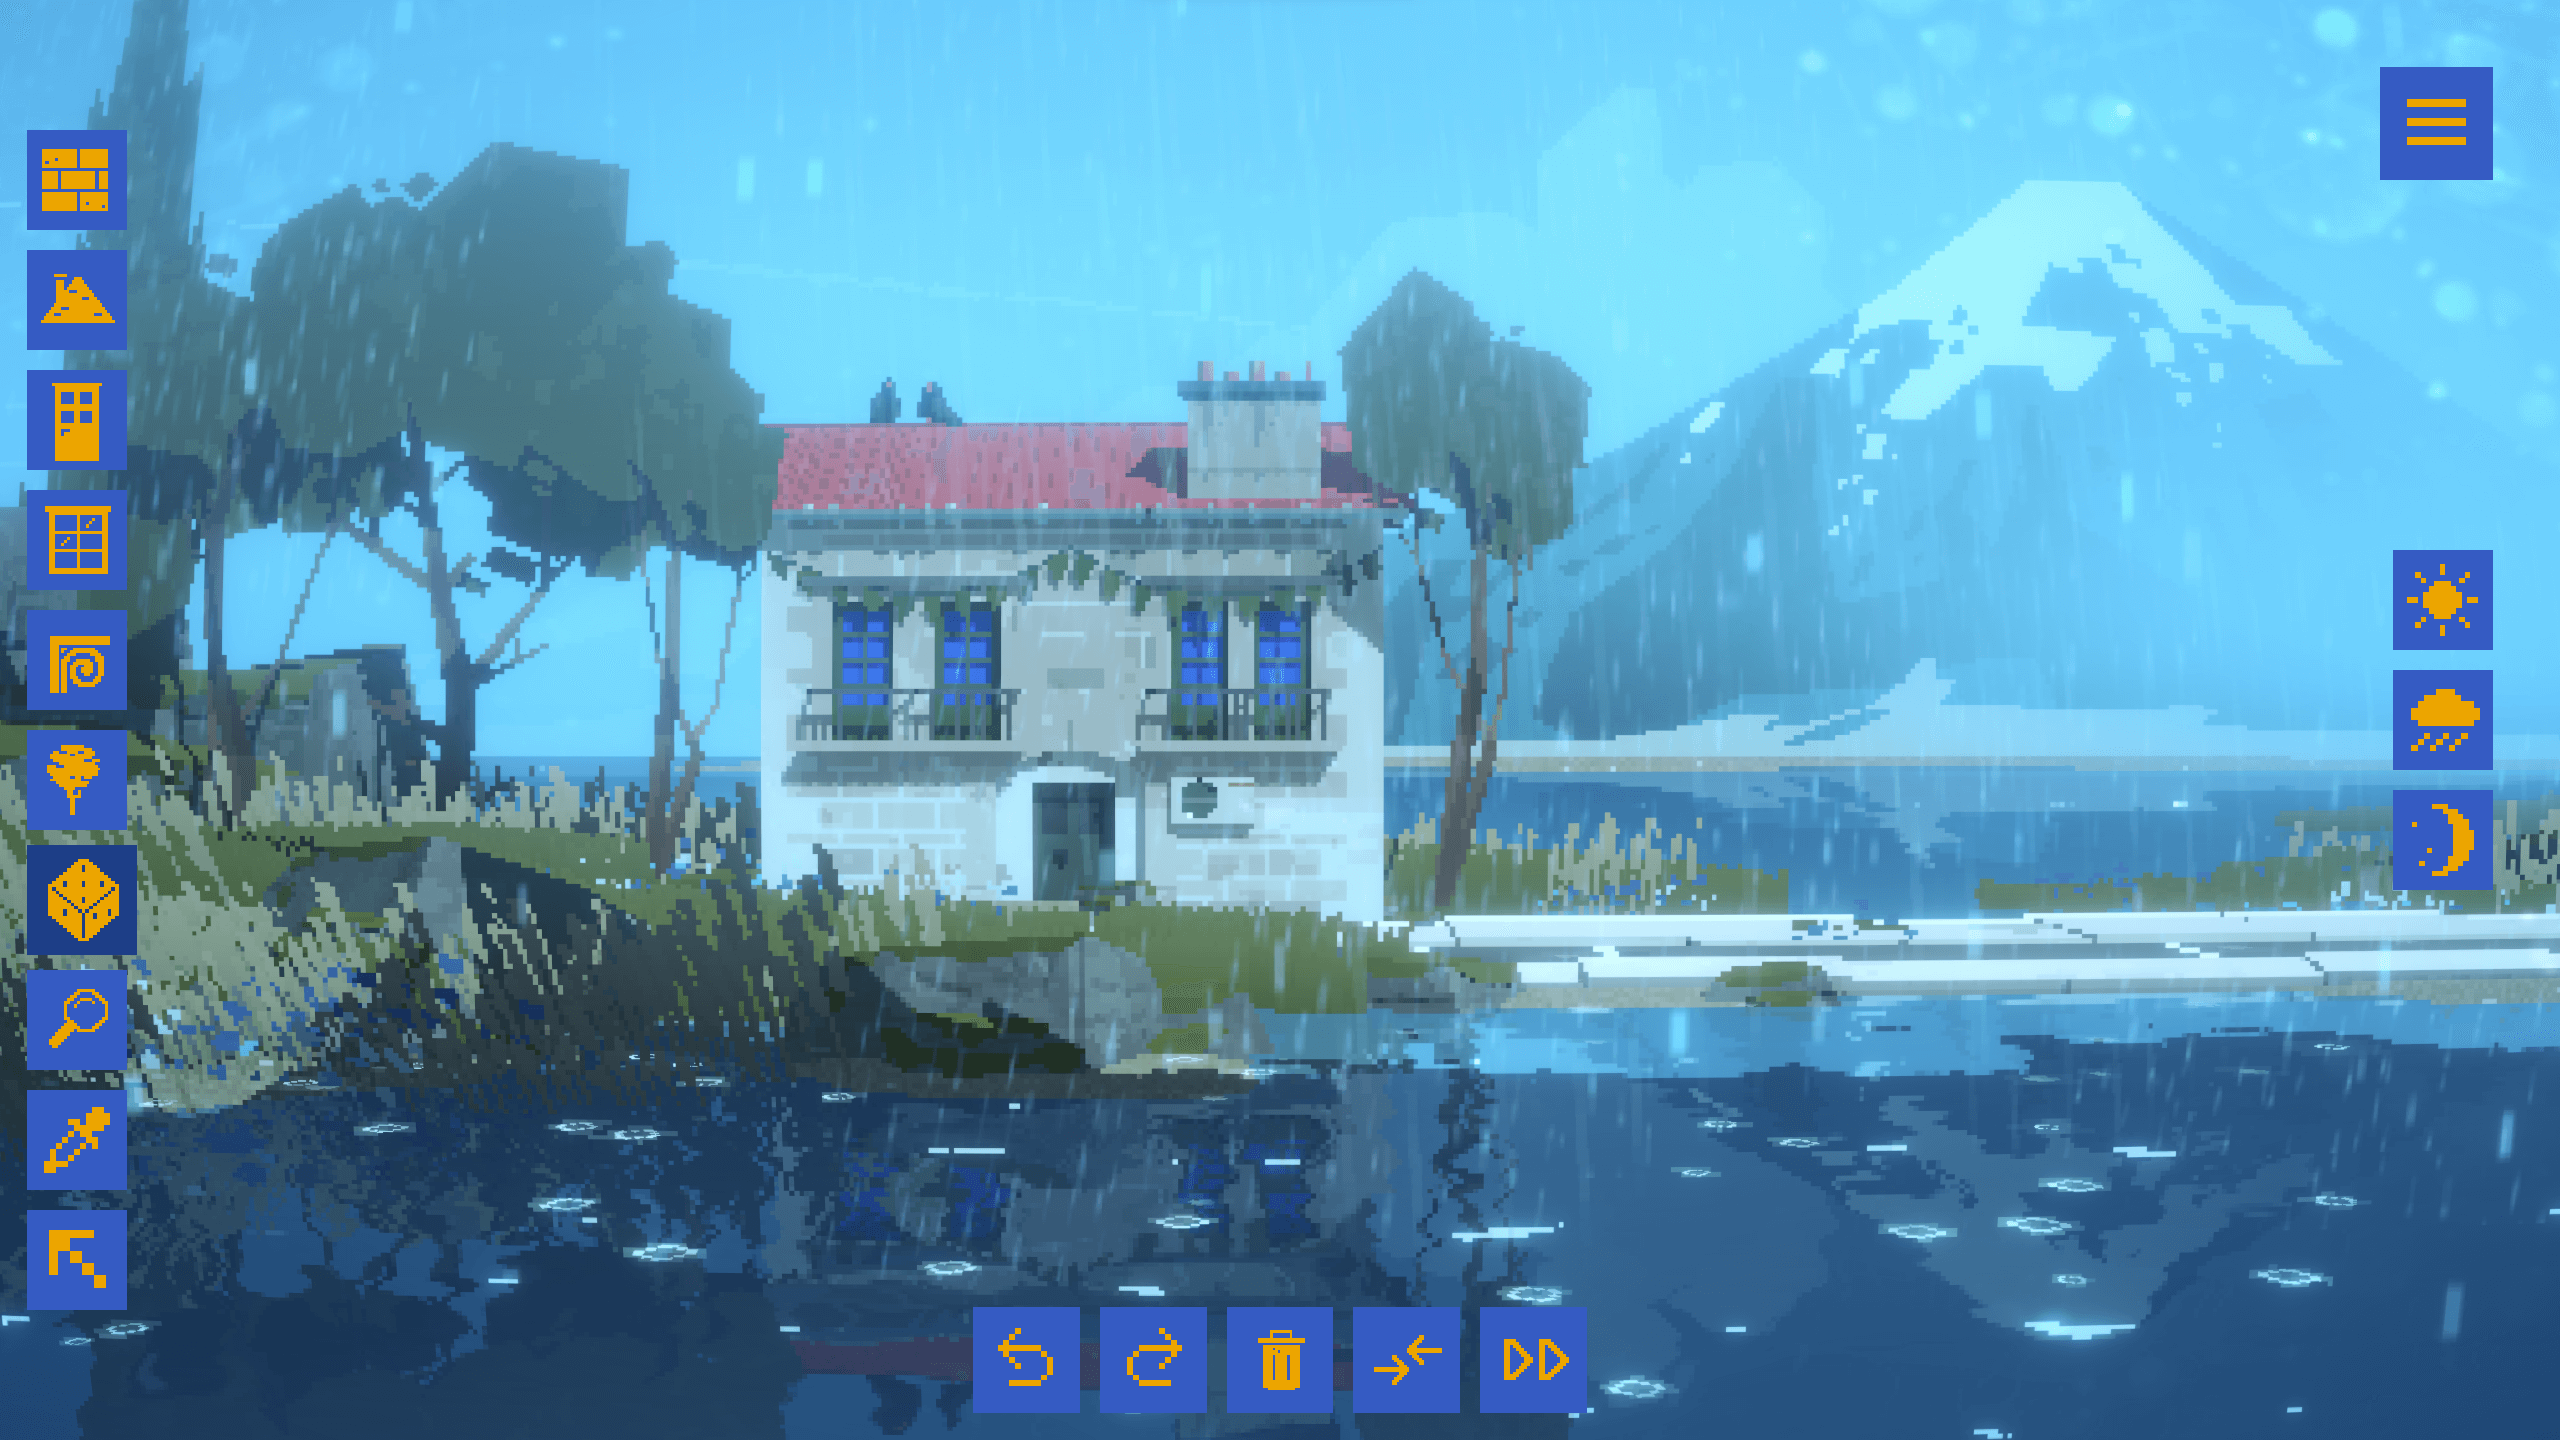 A screen shot from the game SUMMERHOUSE. A tiny house with a red roof and four windows, with a large mountain in the background. The rainy weather option is toggled